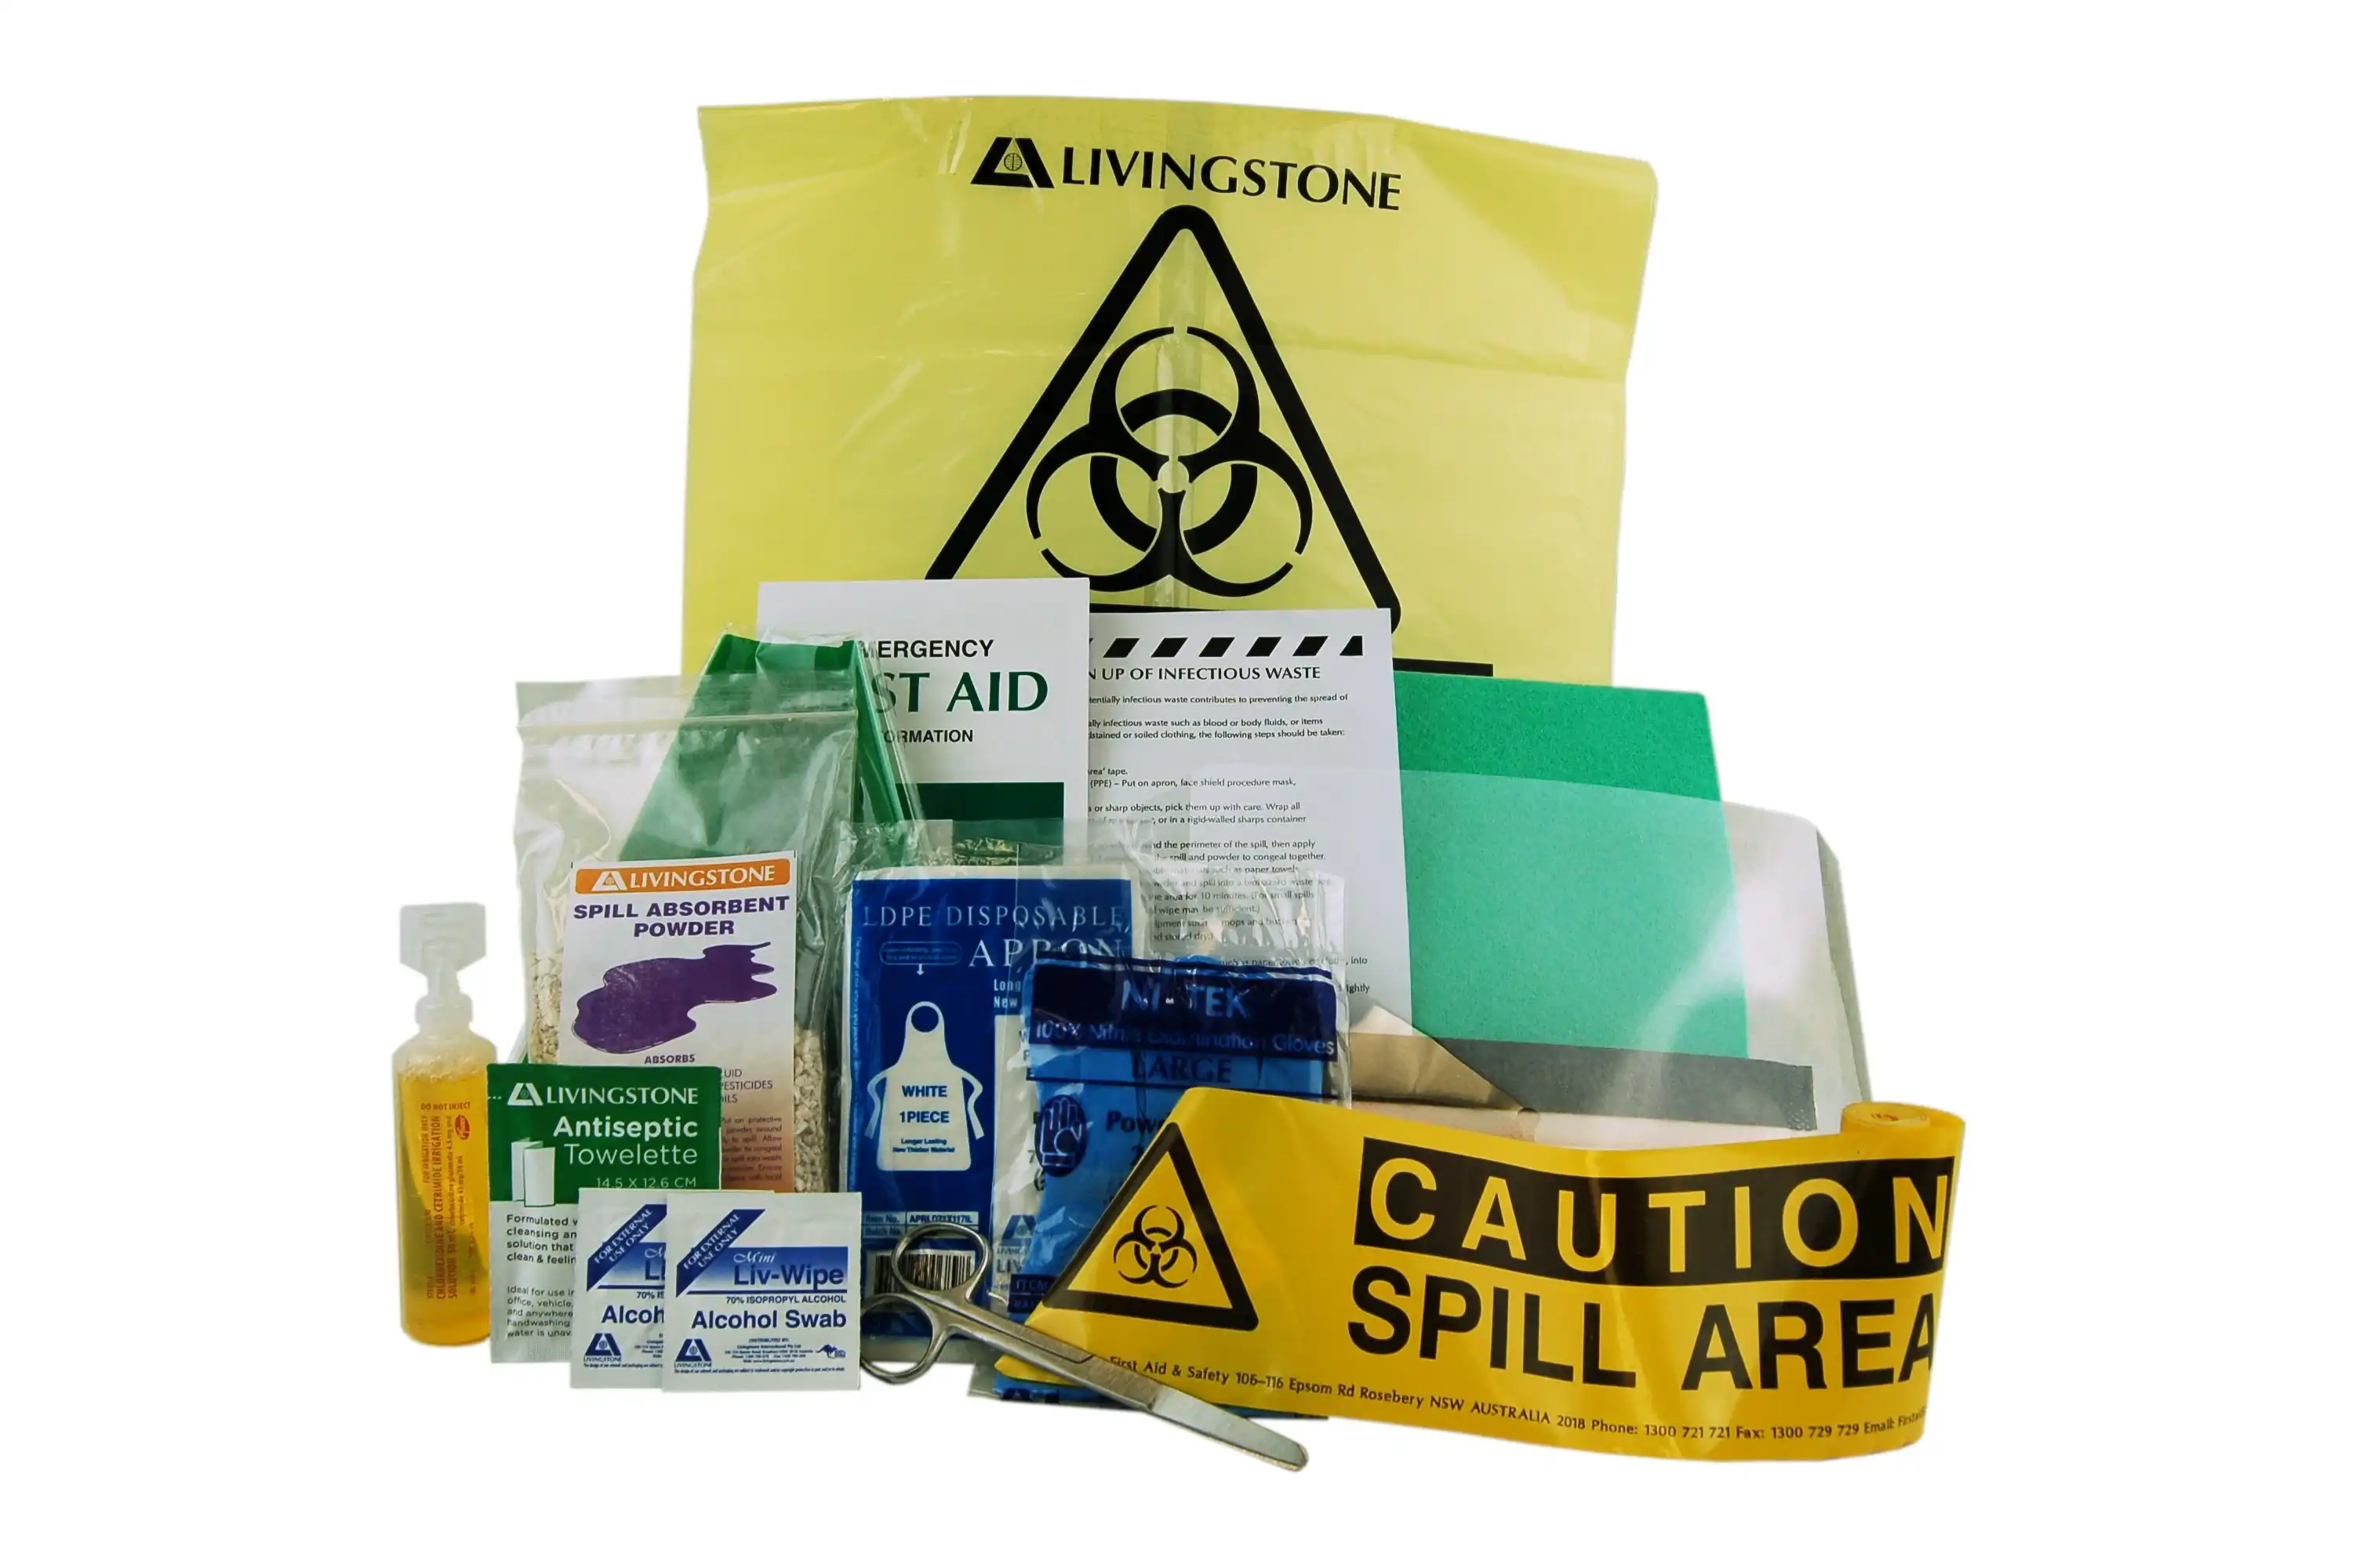 Livingstone Infectious Waste Clean Up Kit